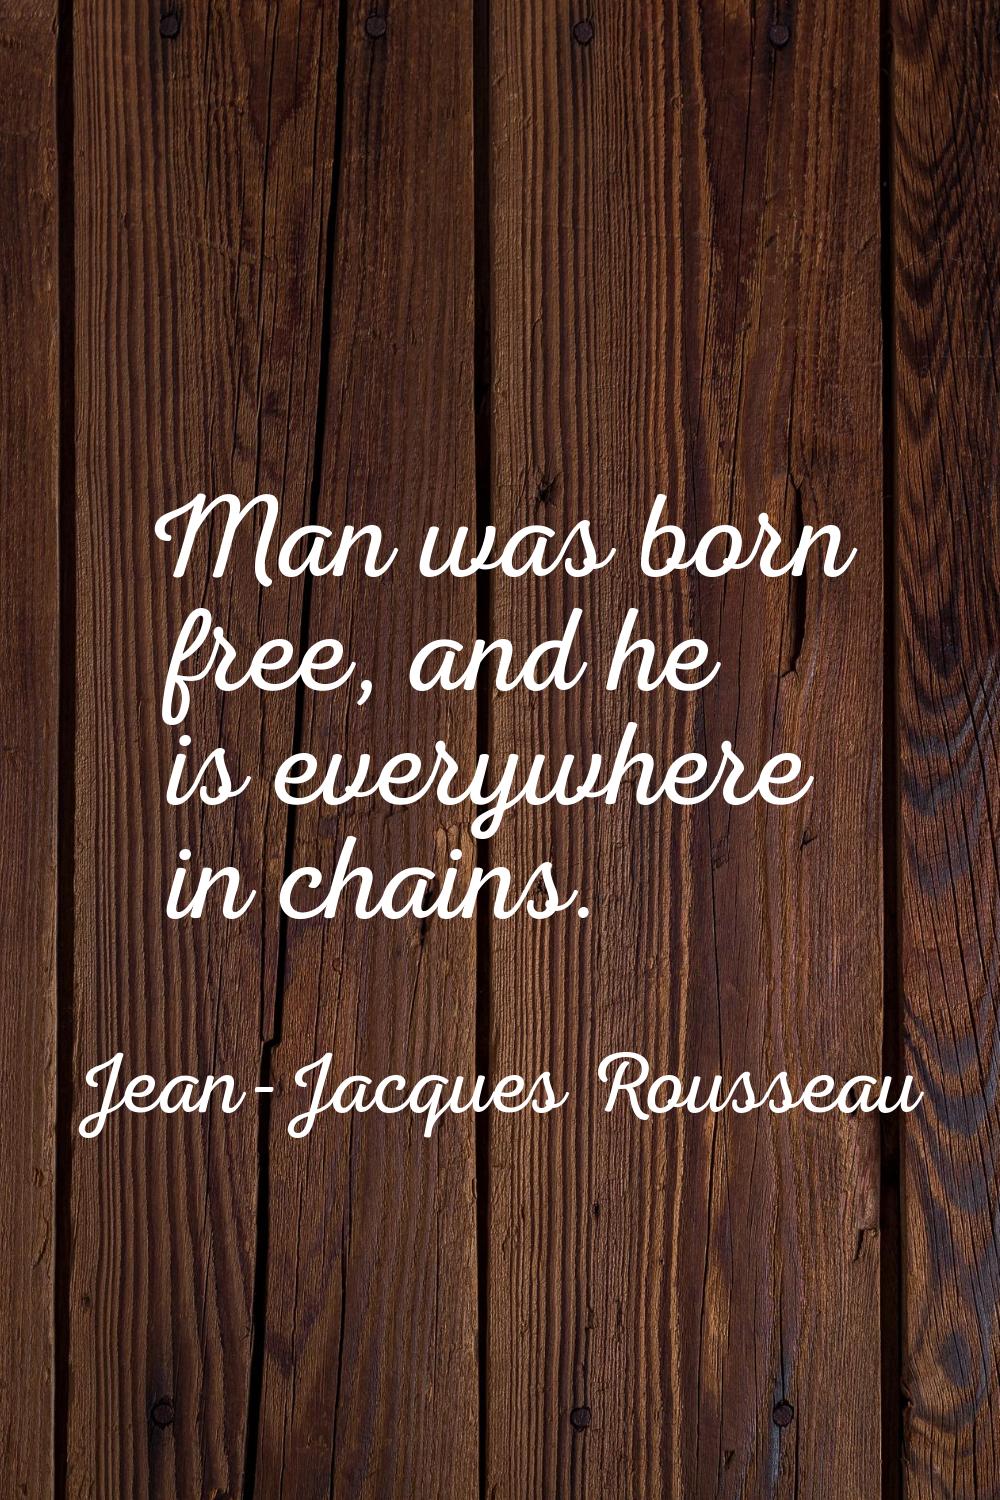 Man was born free, and he is everywhere in chains.